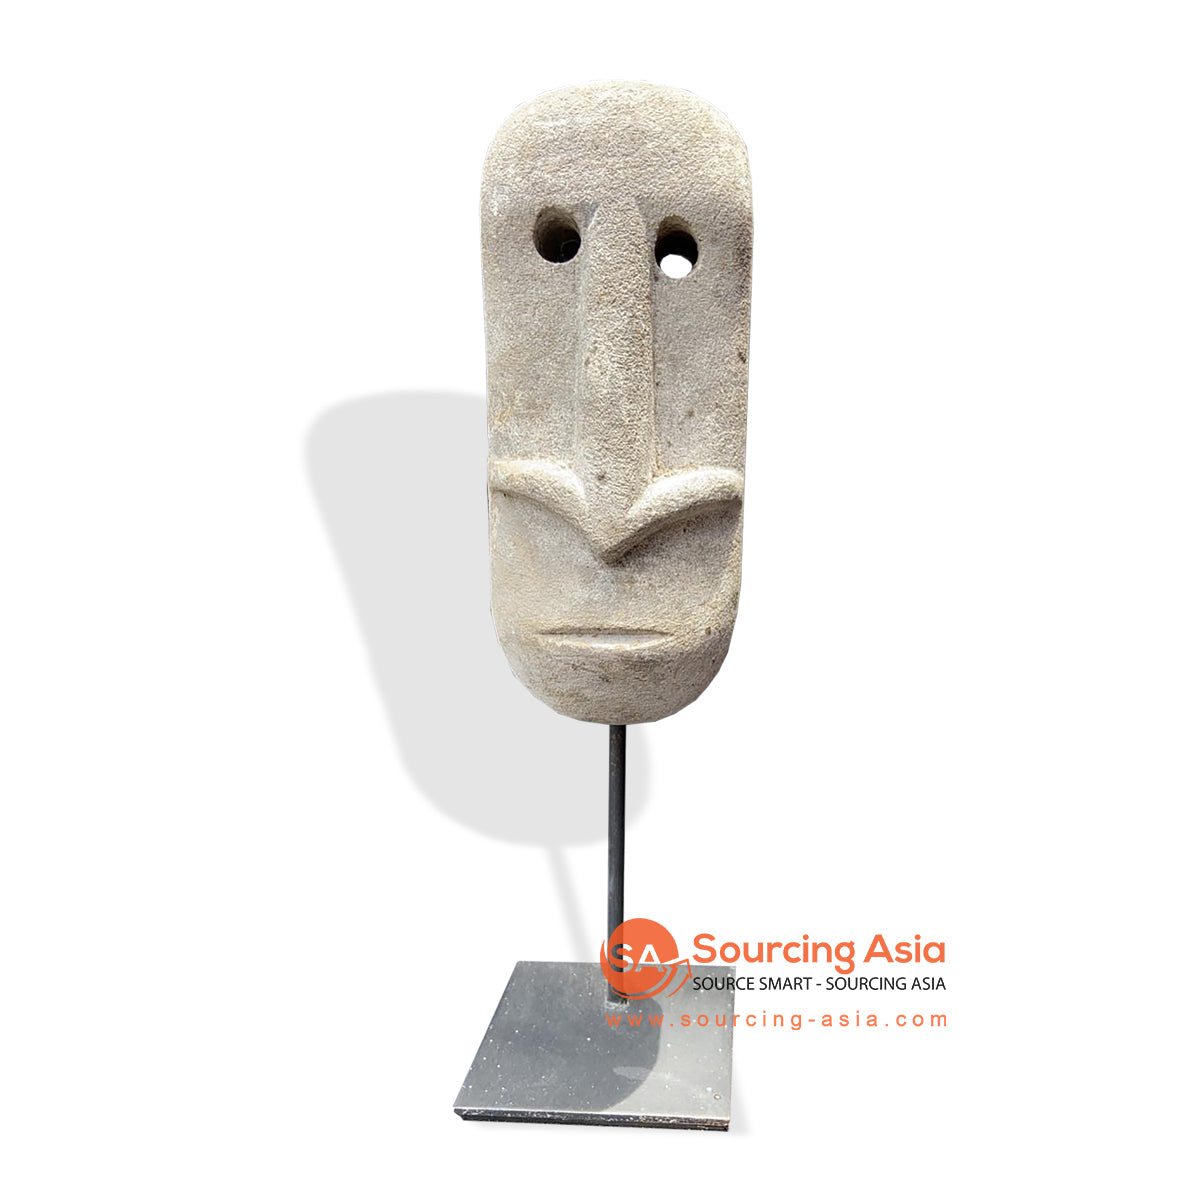 KNT051 ANTIQUE STONE TRIBAL MASK ON STAND DECORATION